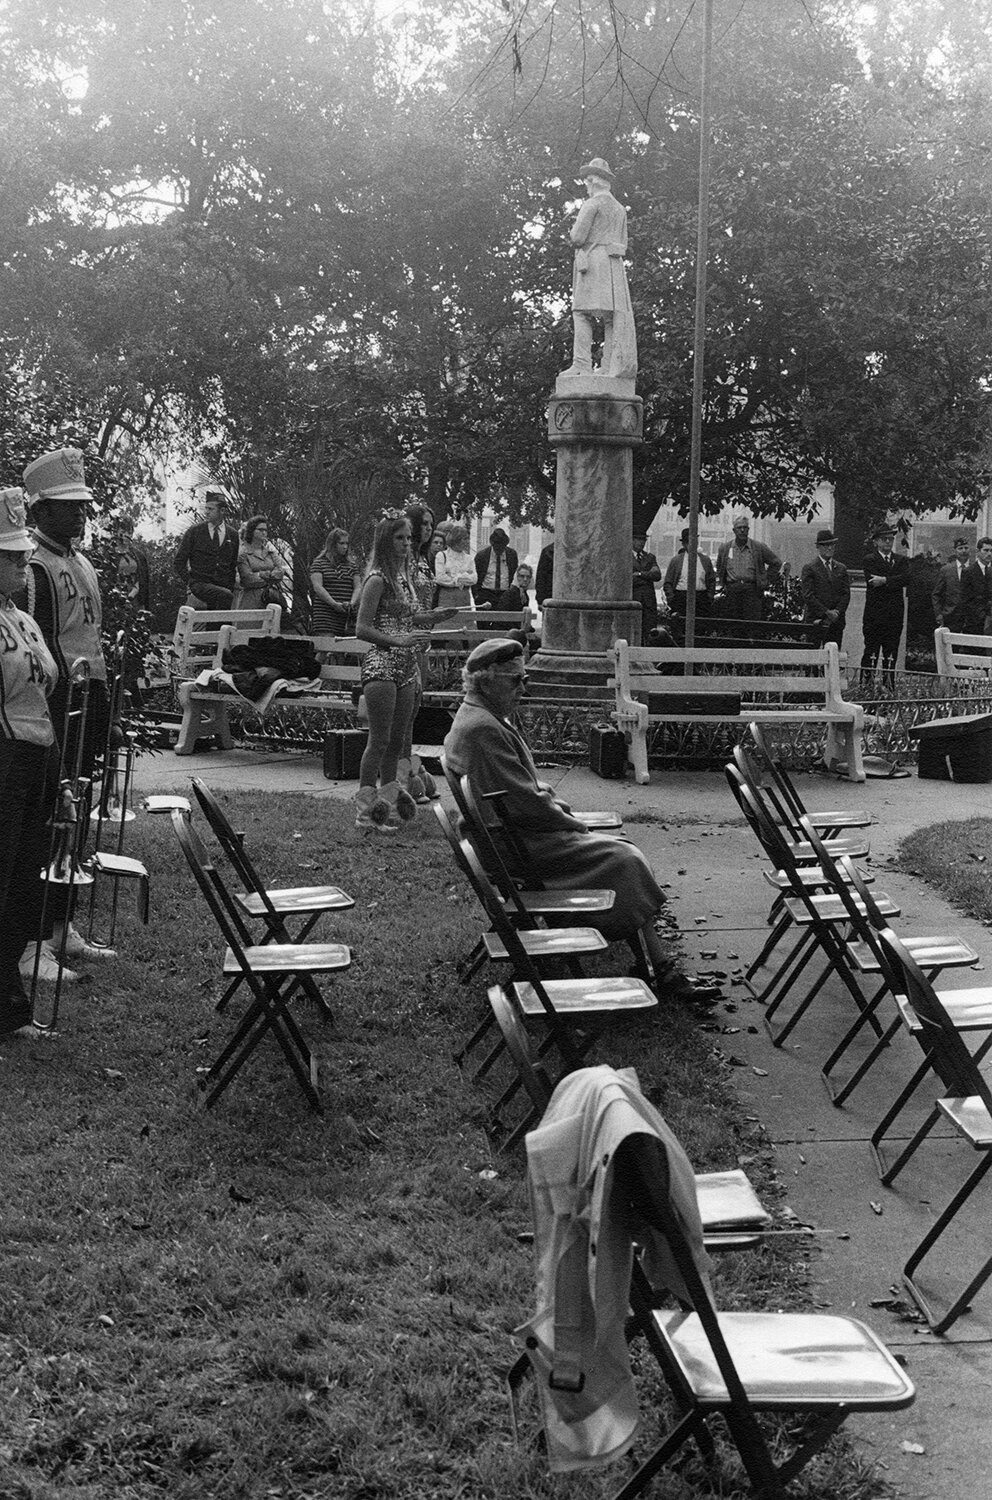   Veterans Day, Willis Park , 1969/ Printed: 1970 Silver Gelatin Print  10 3/4 × 7 in. (image size) The Do Good Fund, Inc., 2017-39 